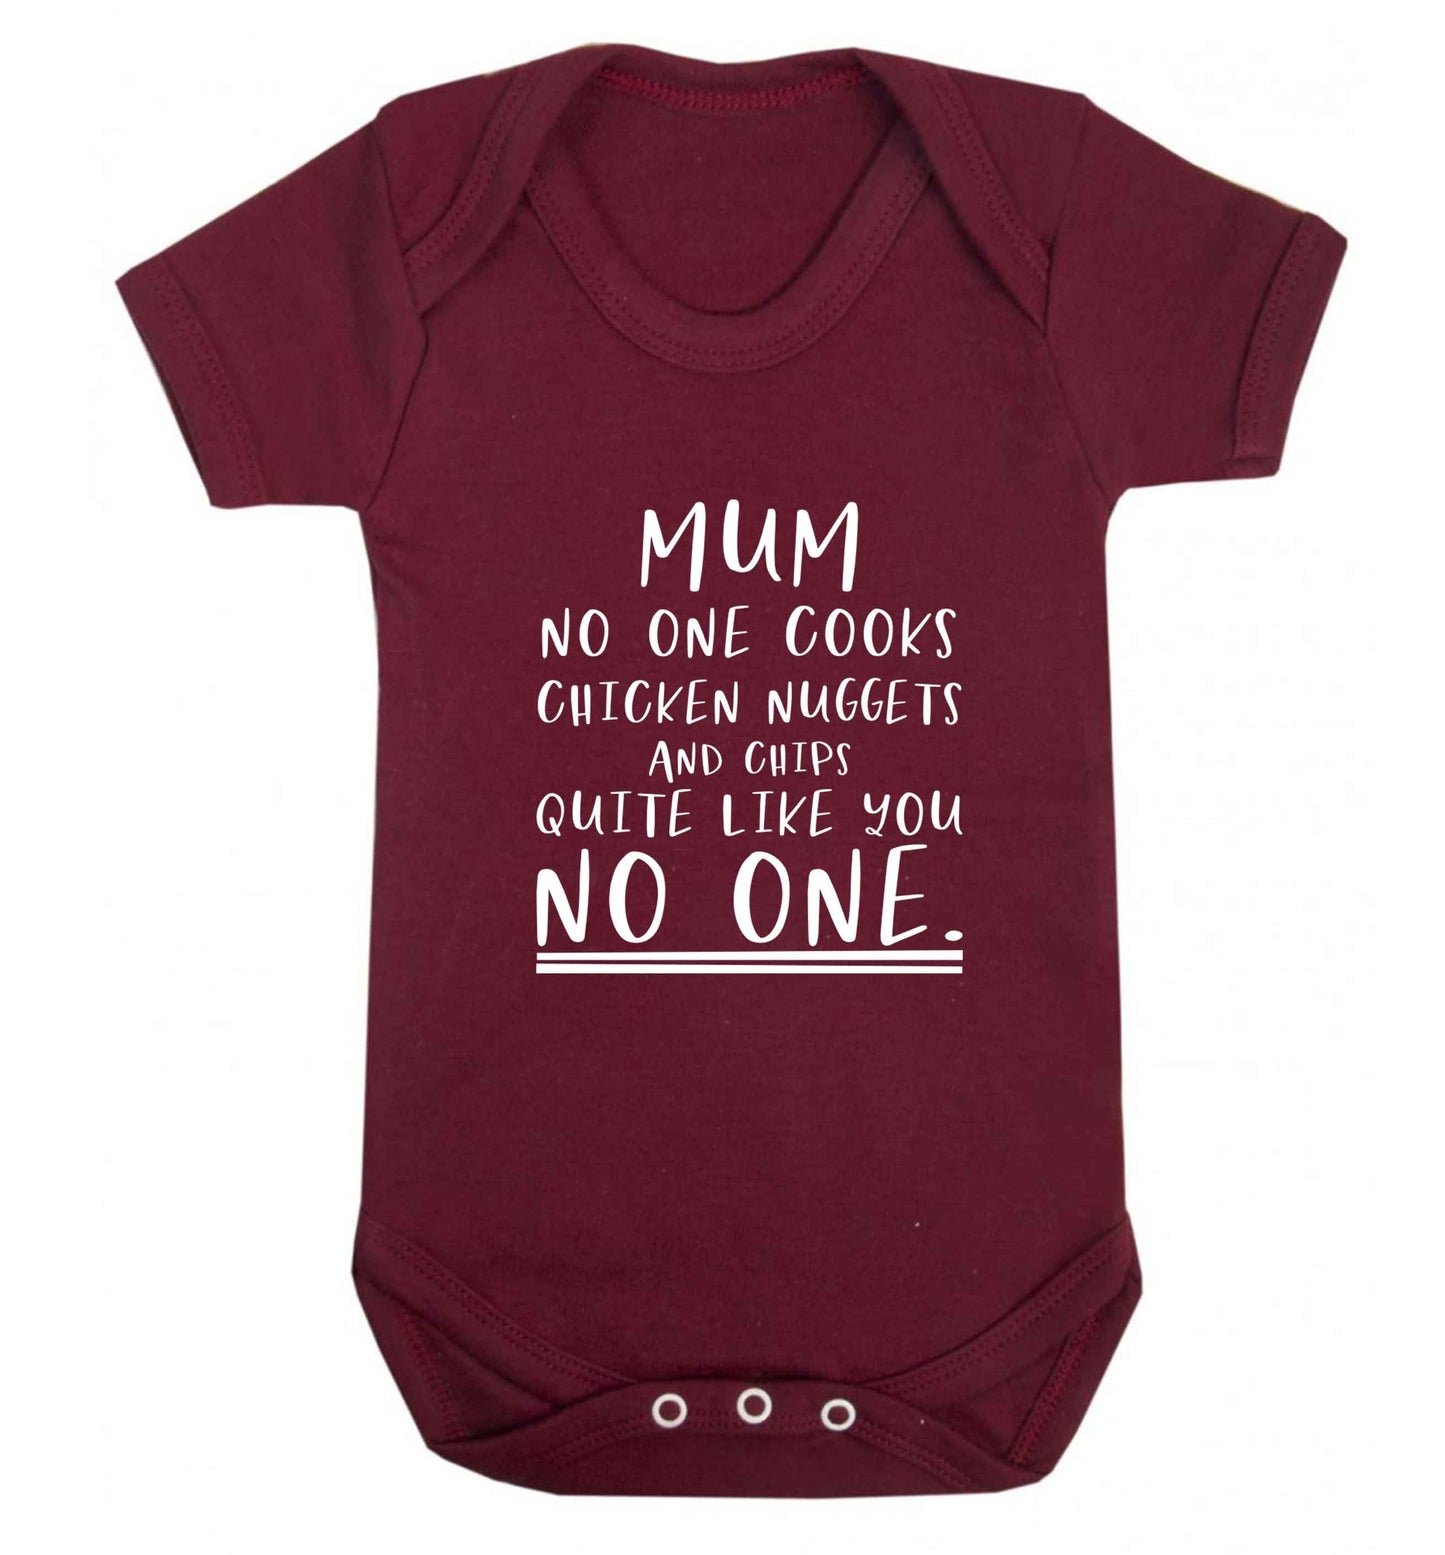 Super funny sassy gift for mother's day or birthday!  Mum no one cooks chicken nuggets and chips like you no one baby vest maroon 18-24 months